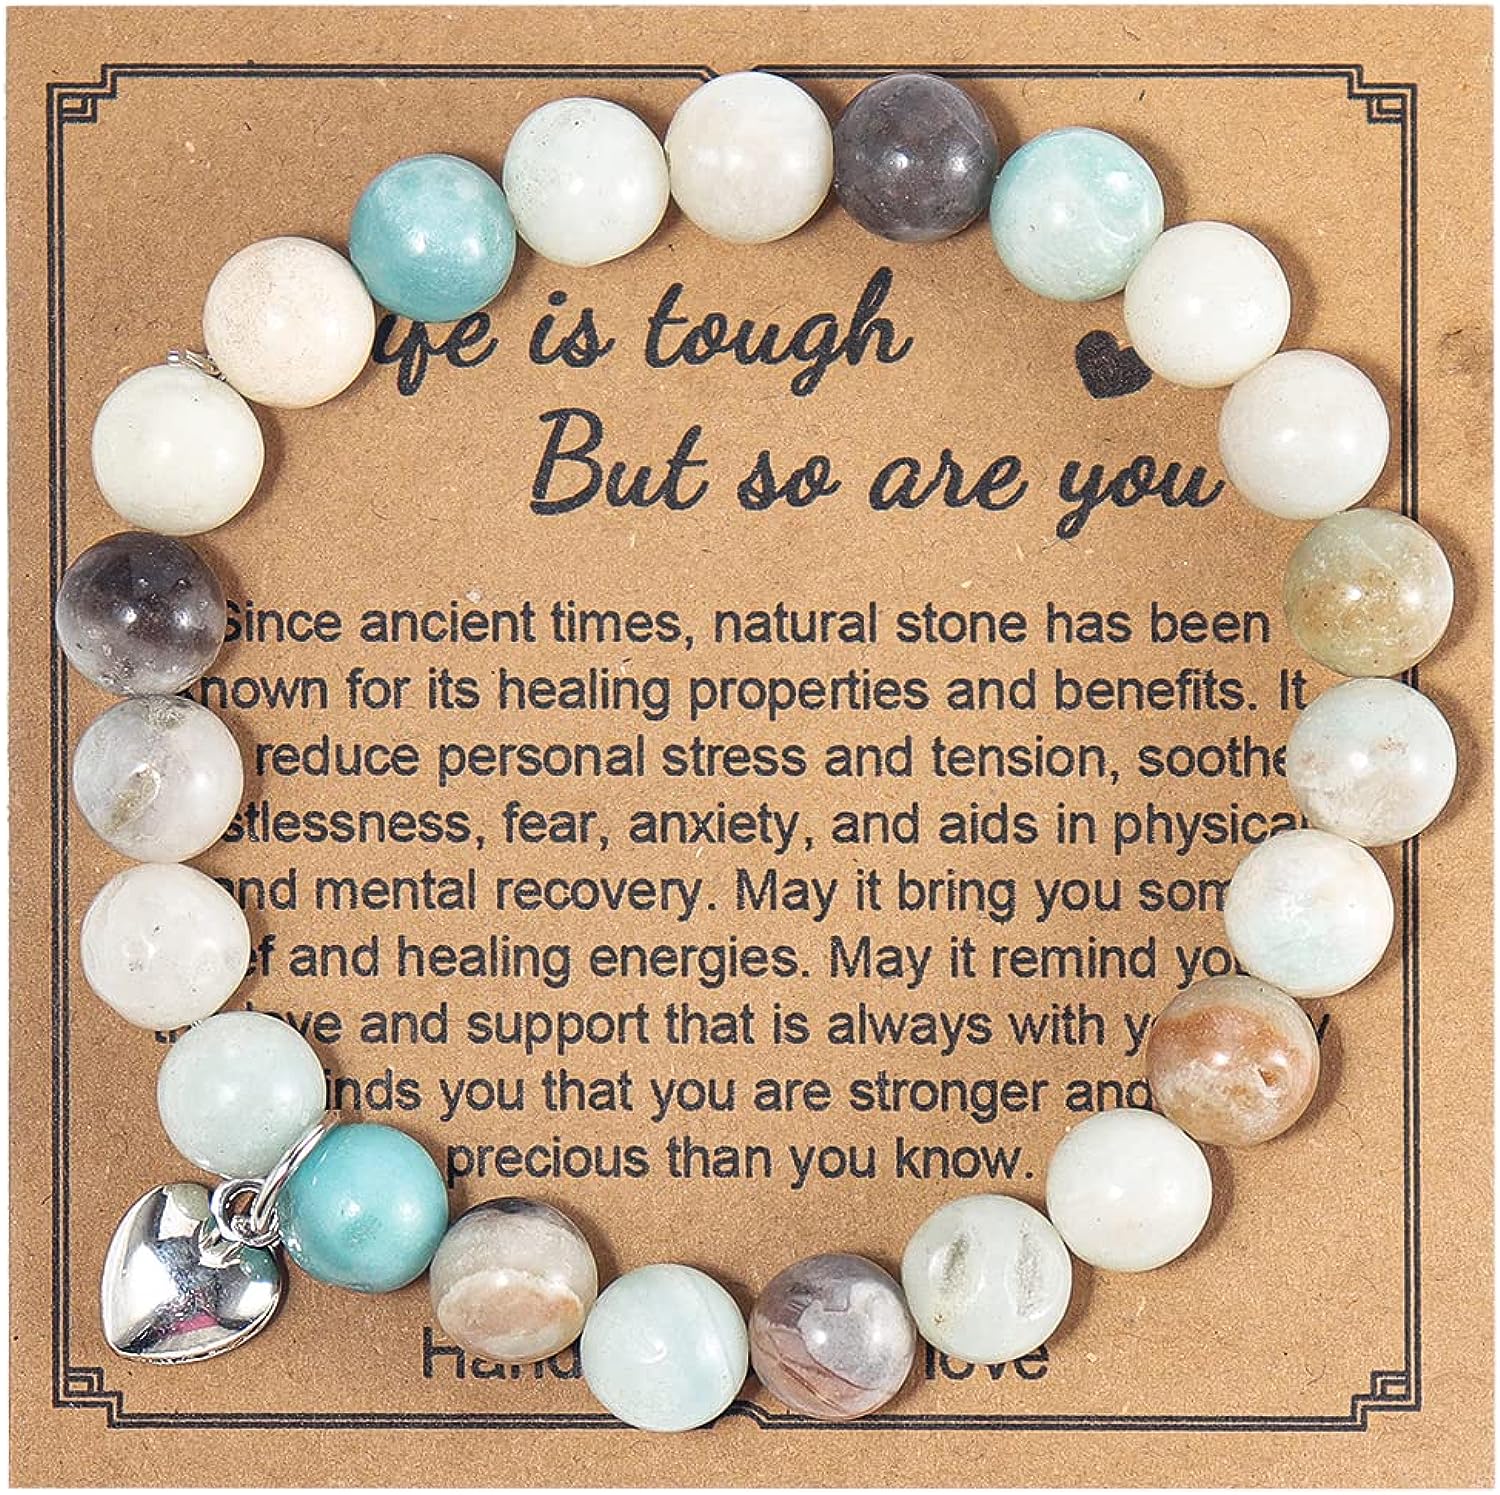 Get Well Soon Gifts -Natural Stone Healing Relaxation Bracelets review